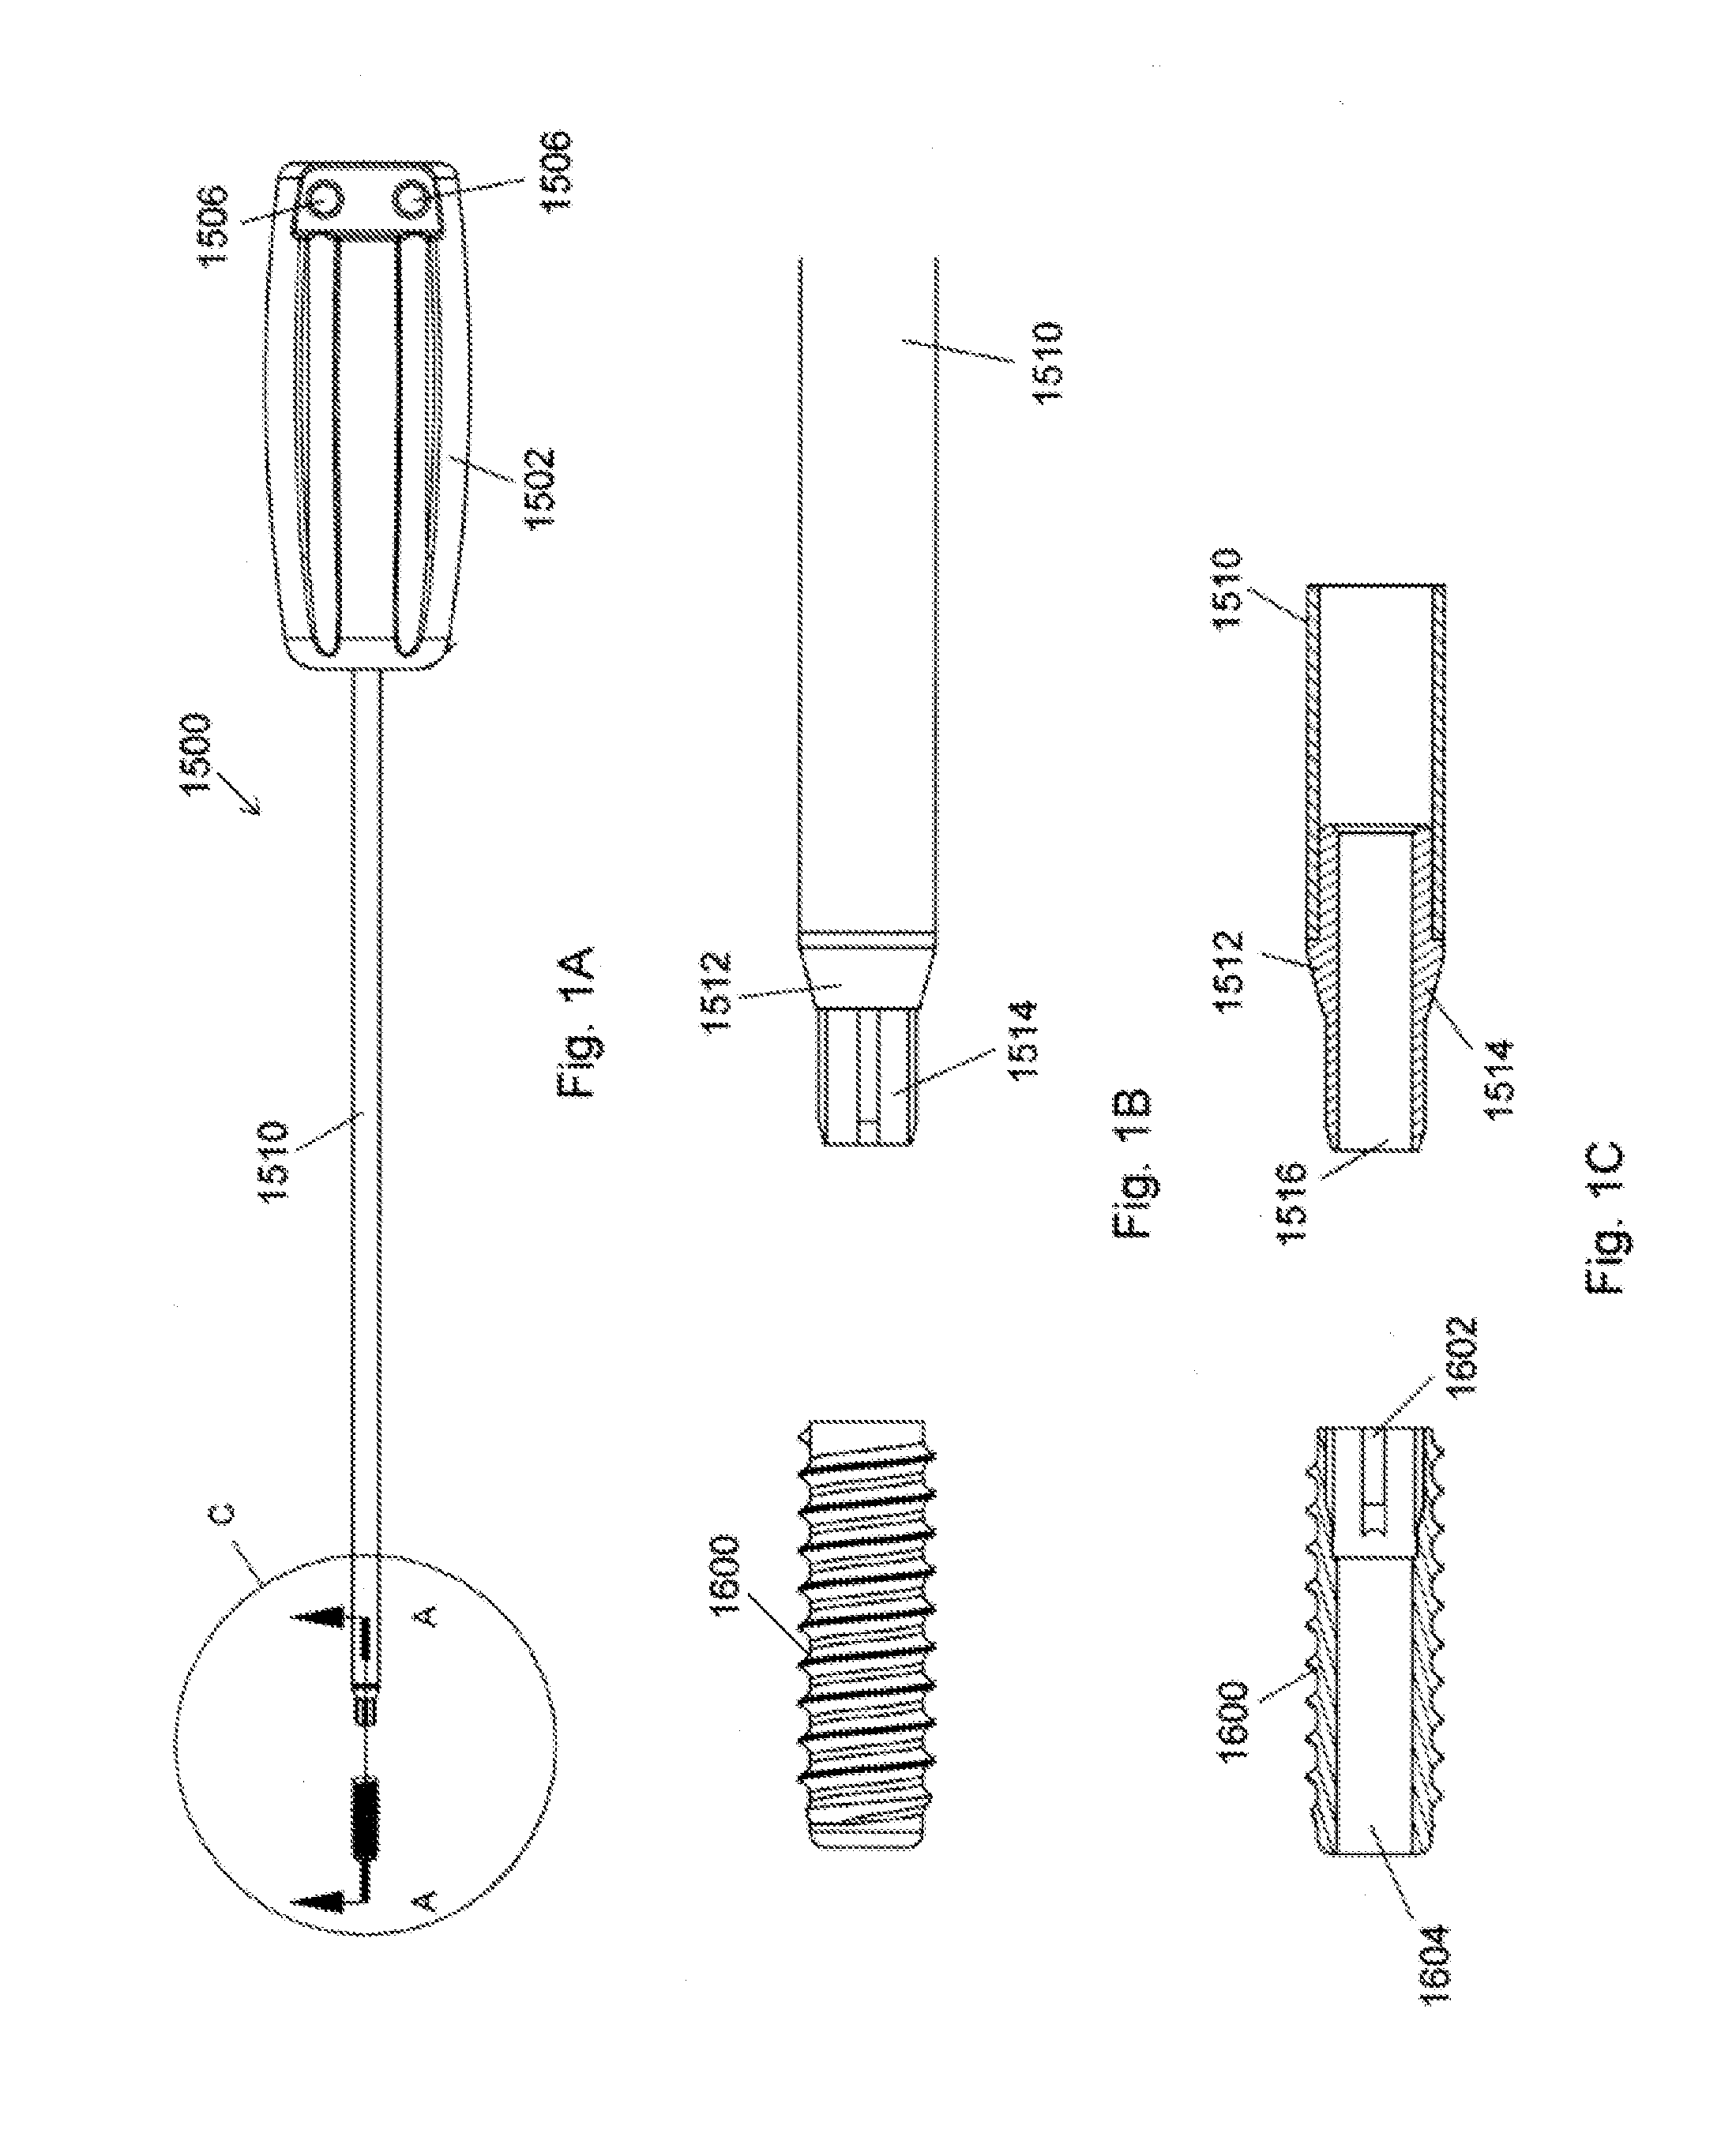 Ceramic implant placement systems and superelastic suture retention loops for use therewith